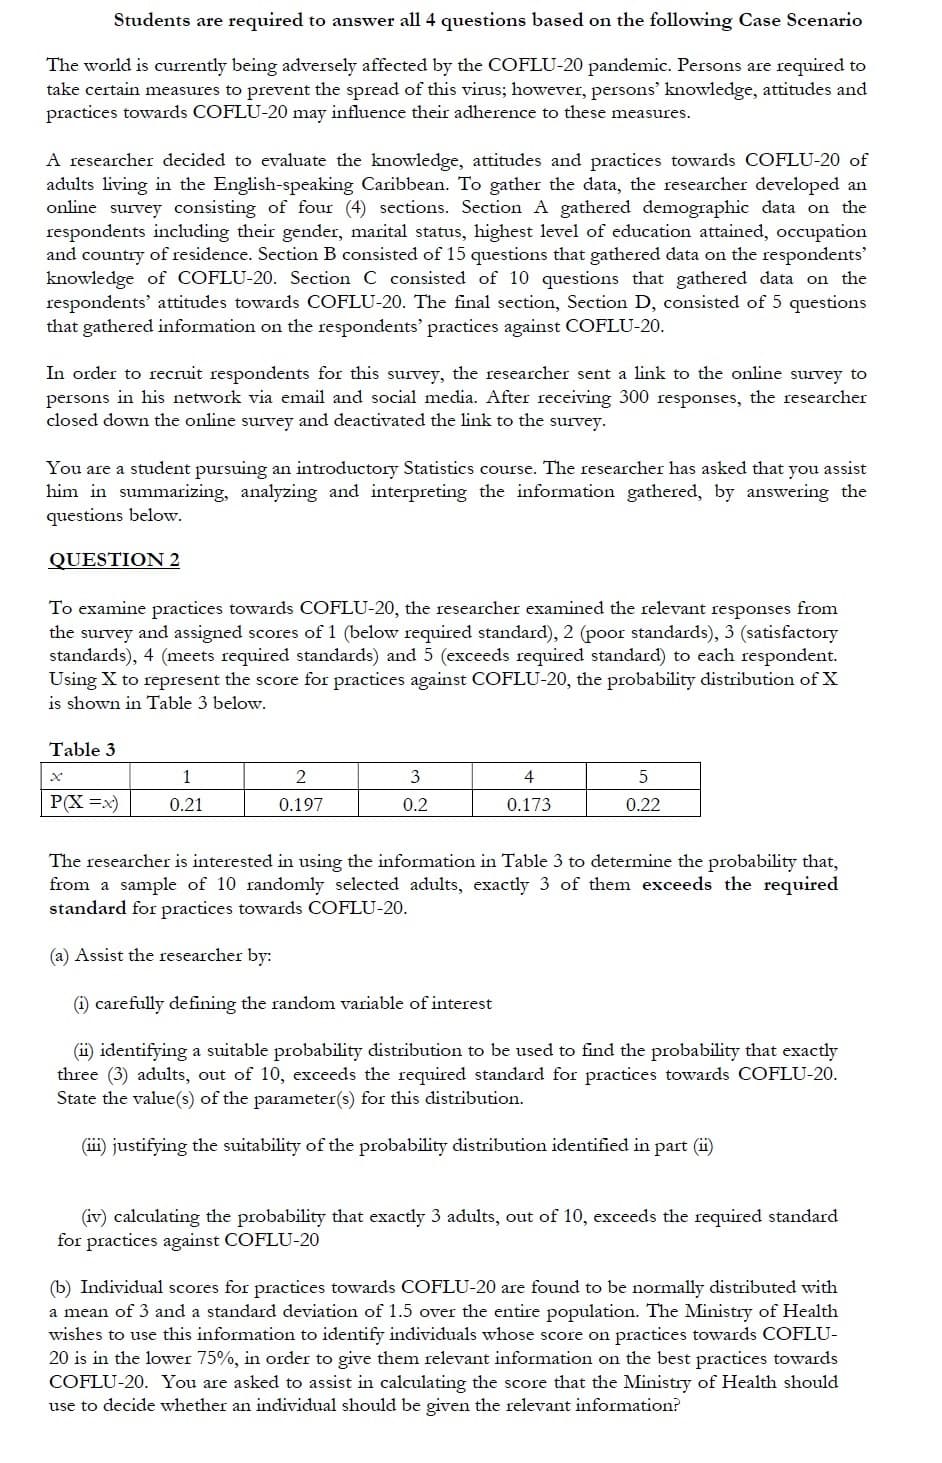 Students are required to answer all 4 questions based on the following Case Scenario
The world is currently being adversely affected by the COFLU-20 pandemic. Persons are required to
take certain measures to prevent the spread of this virus; however, persons' knowledge, attitudes and
practices towards COFLU-20 may influence their adherence to these measures.
A researcher decided to evaluate the knowledge, attitudes and practices towards COFLU-20 of
adults living in the English-speaking Caribbean. To gather the data, the researcher developed an
online survey consisting of four (4) sections. Section A gathered demographic data on the
respondents including their gender, marital status, highest level of education attained, occupation
and country of residence. Section B consisted of 15 questions that gathered data on the respondents'
knowledge of COFLU-20. Section C consisted of 10 questions that gathered data on the
respondents' attitudes towards COFLU-20. The final section, Section D, consisted of 5 questions
that gathered information on the respondents' practices against COFLU-20.
In order to recruit respondents for this survey, the researcher sent a link to the online survey to
persons in his network via email and social media. After receiving 300 responses, the researcher
closed down the online survey and deactivated the link to the survey.
You are a student pursuing an introductory Statistics course. The researcher has asked that you assist
him in summarizing, analyzing and interpreting the information gathered, by answering the
questions below.
QUESTION 2
To examine practices towards COFLU-20, the researcher examined the relevant responses from
the survey and assigned scores of 1 (below required standard), 2 (poor standards), 3 (satisfactory
standards), 4 (meets required standards) and 5 (exceeds required standard) to each respondent.
Using X to represent the score for practices against COFLU-20, the probability distribution of X
is shown in Table 3 below.
Table 3
х
3
4
P(X =x)
0.21
0.197
0.2
0.173
0.22
The researcher is interested in using the information in Table 3 to determine the probability that,
from a sample of 10 randomly selected adults, exactly 3 of them exceeds the required
standard for practices towards COFLU-20.
(a) Assist the researcher by:
i) carefully defining the random variable of interest
(ii) identifying a suitable probability distribution to be used to find the probability that exactly
three (3) adults, out of 10, exceeds the required standard for practices towards COFLU-20.
State the value(s) of the parameter(s) for this distribution.
(ii) justifying the suitability of the probability distribution identified in part (ii)
(iv) calculating the probability that exactly 3 adults, out of 10, exceeds the required standard
for practices against COFLU-20
(b) Individual scores for practices towards COFLU-20 are found to be normally distributed with
a mean of 3 and a standard deviation of 1.5 over the entire population. The Ministry of Health
wishes to use this information to identify individuals whose score on practices towards COFLU-
20 is in the lower 75%, in order to give them relevant information on the best practices towards
COFLU-20. You are asked to assist in calculating the score that the Ministry of Health should
use to decide whether an individual should be given the relevant information?
